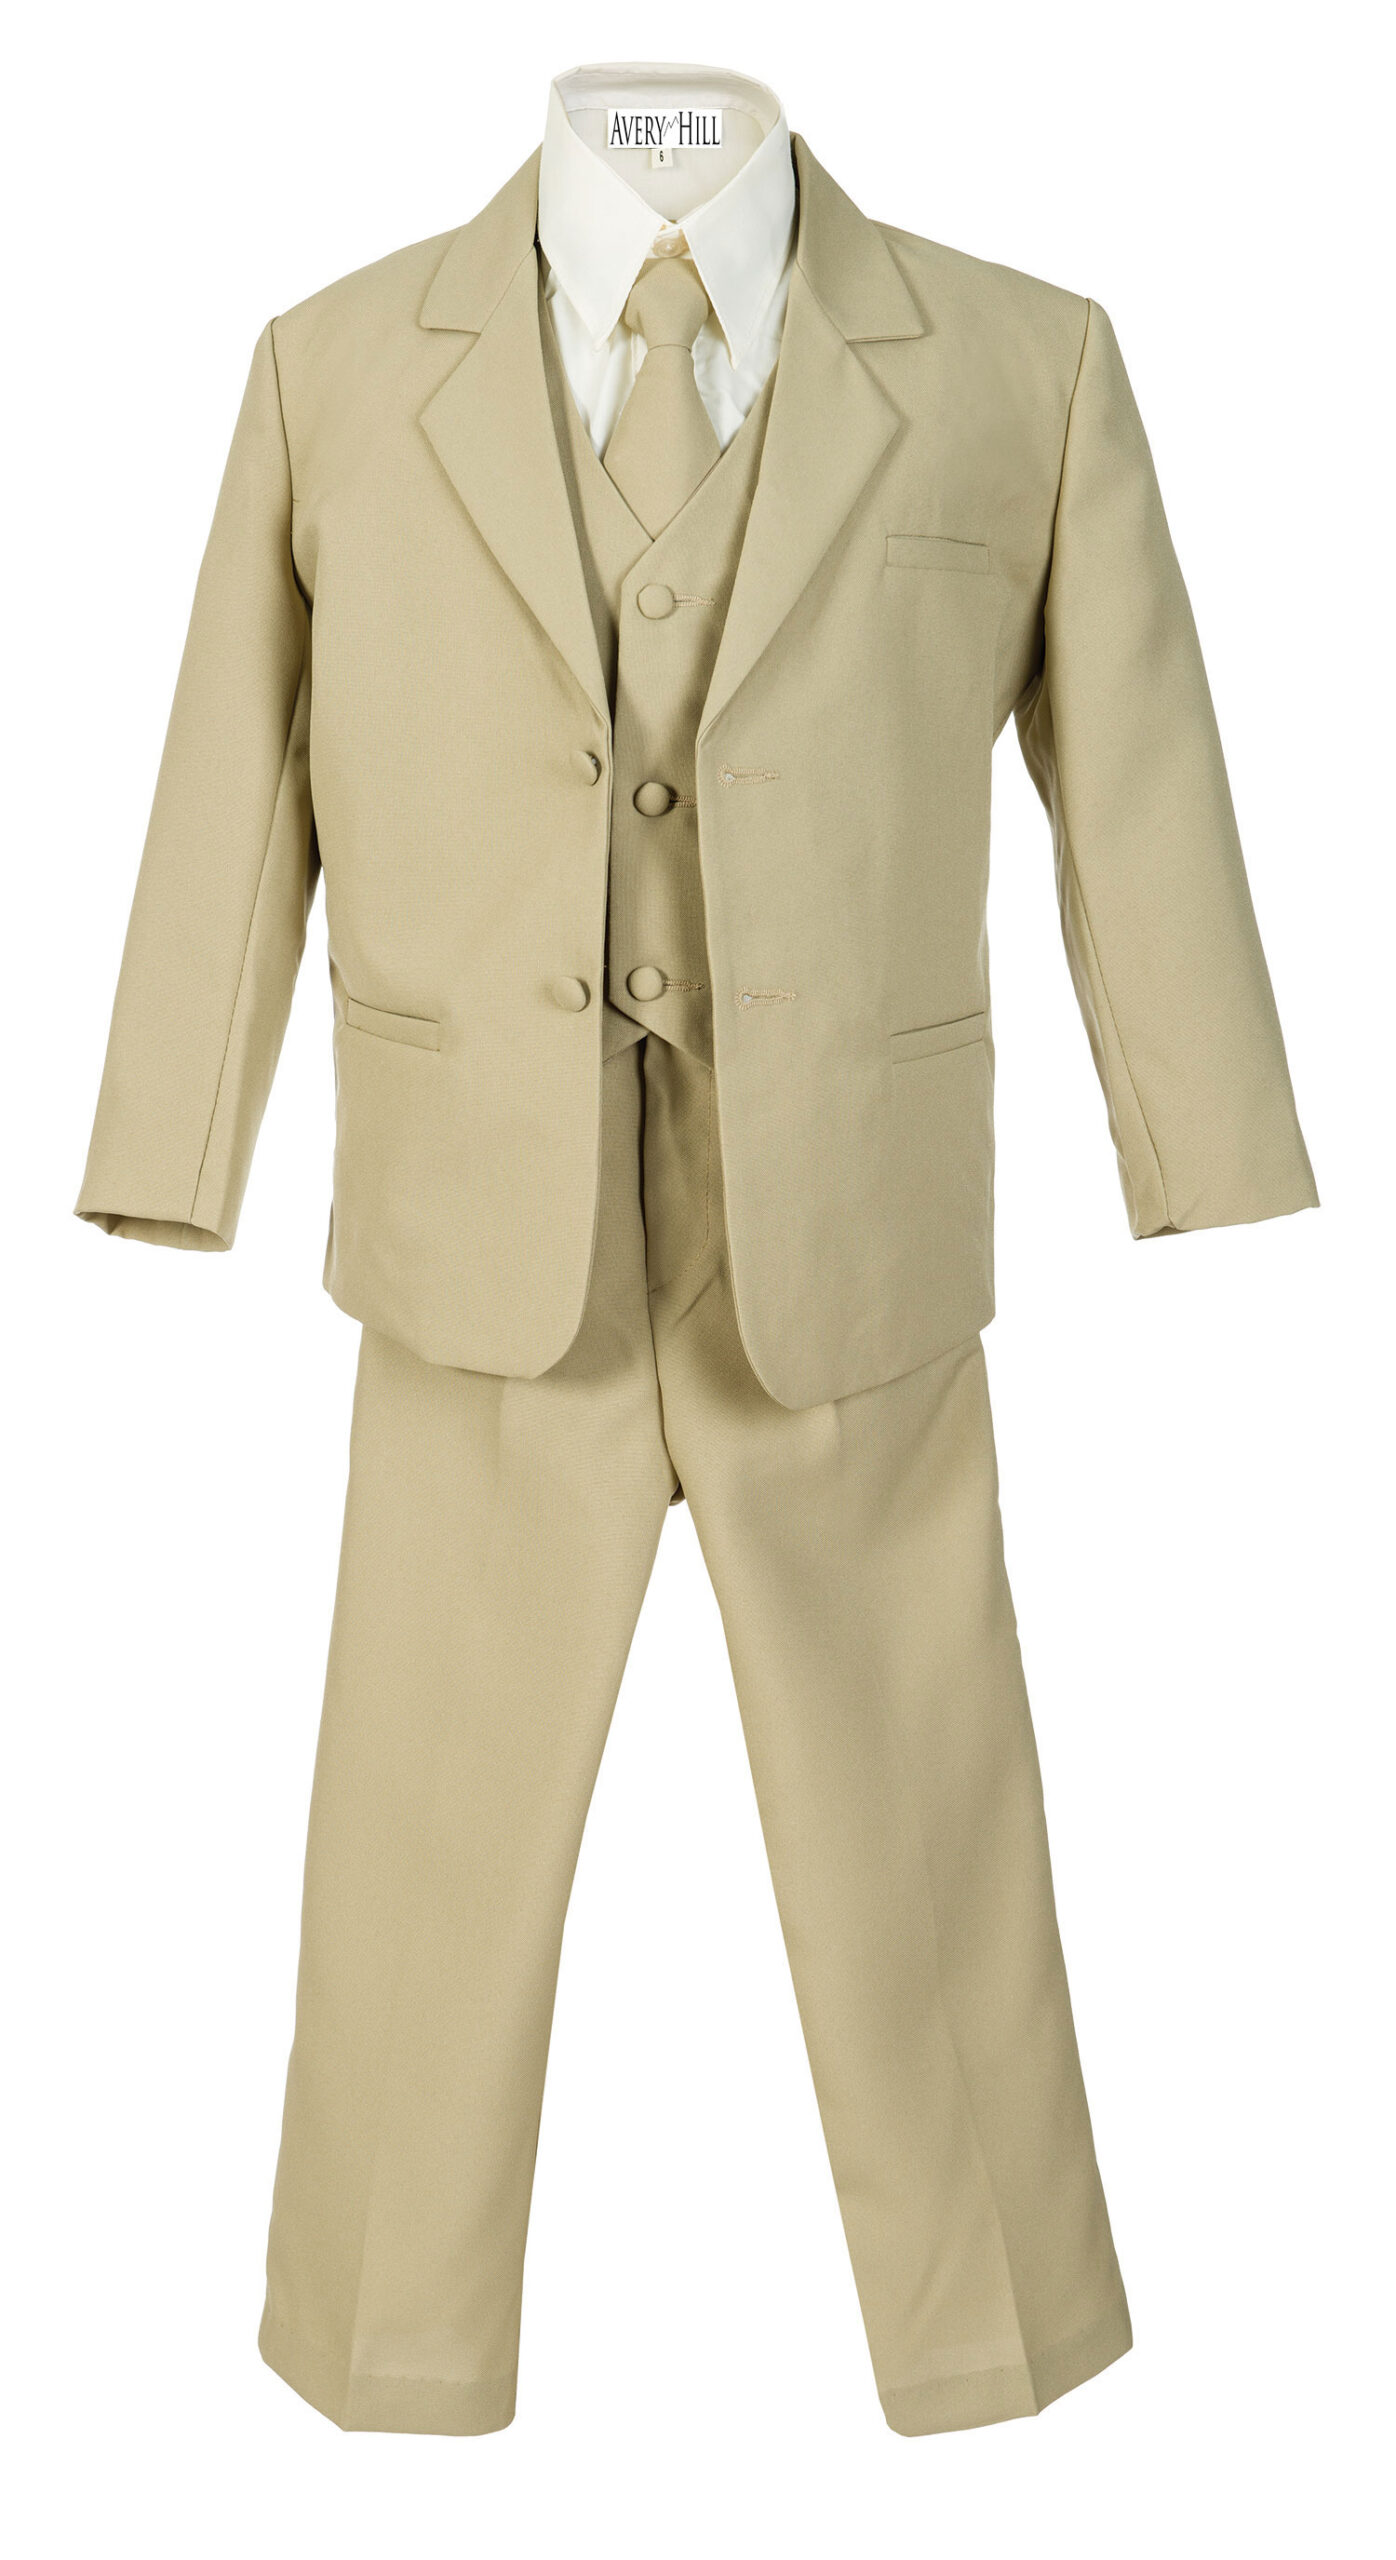 Avery Hill Boys Formal 5 Piece Suit with Shirt and Vest Khaki - 7